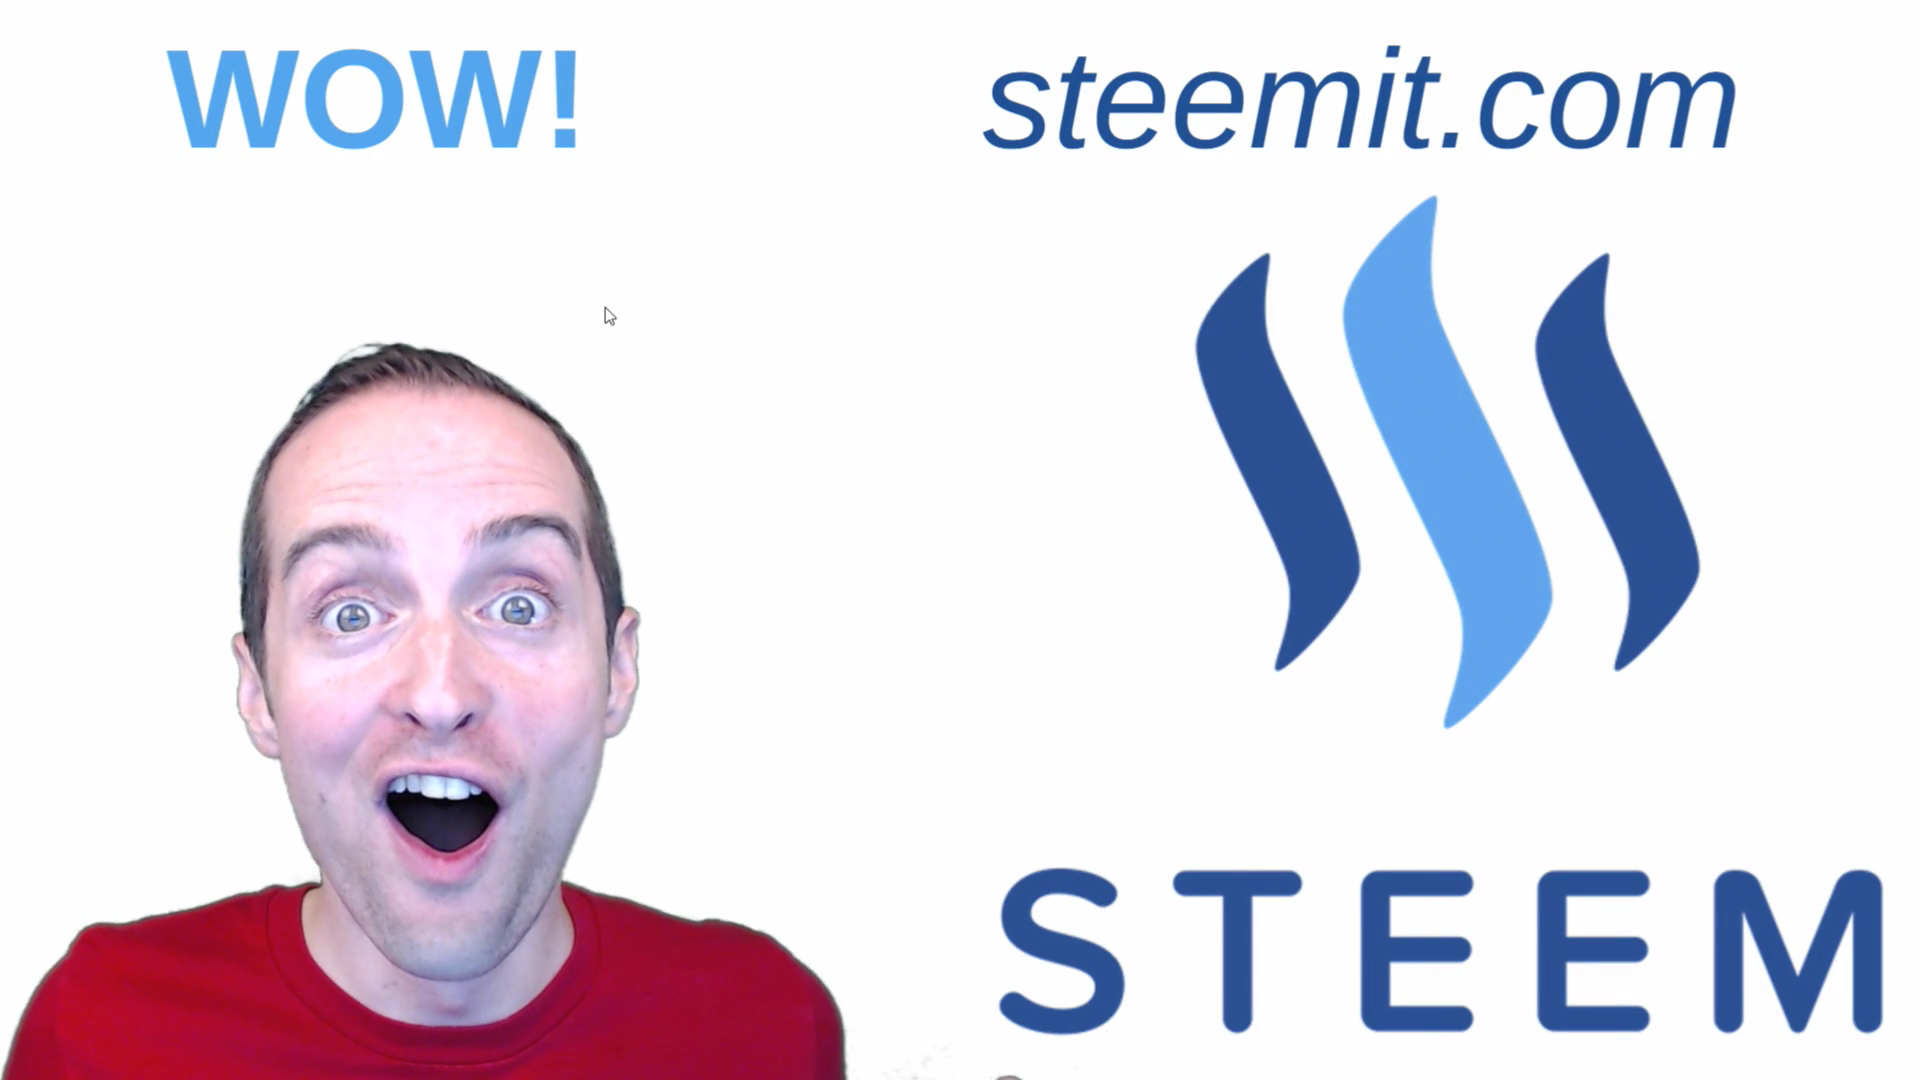 Steemit video ad 2 number one new website.png